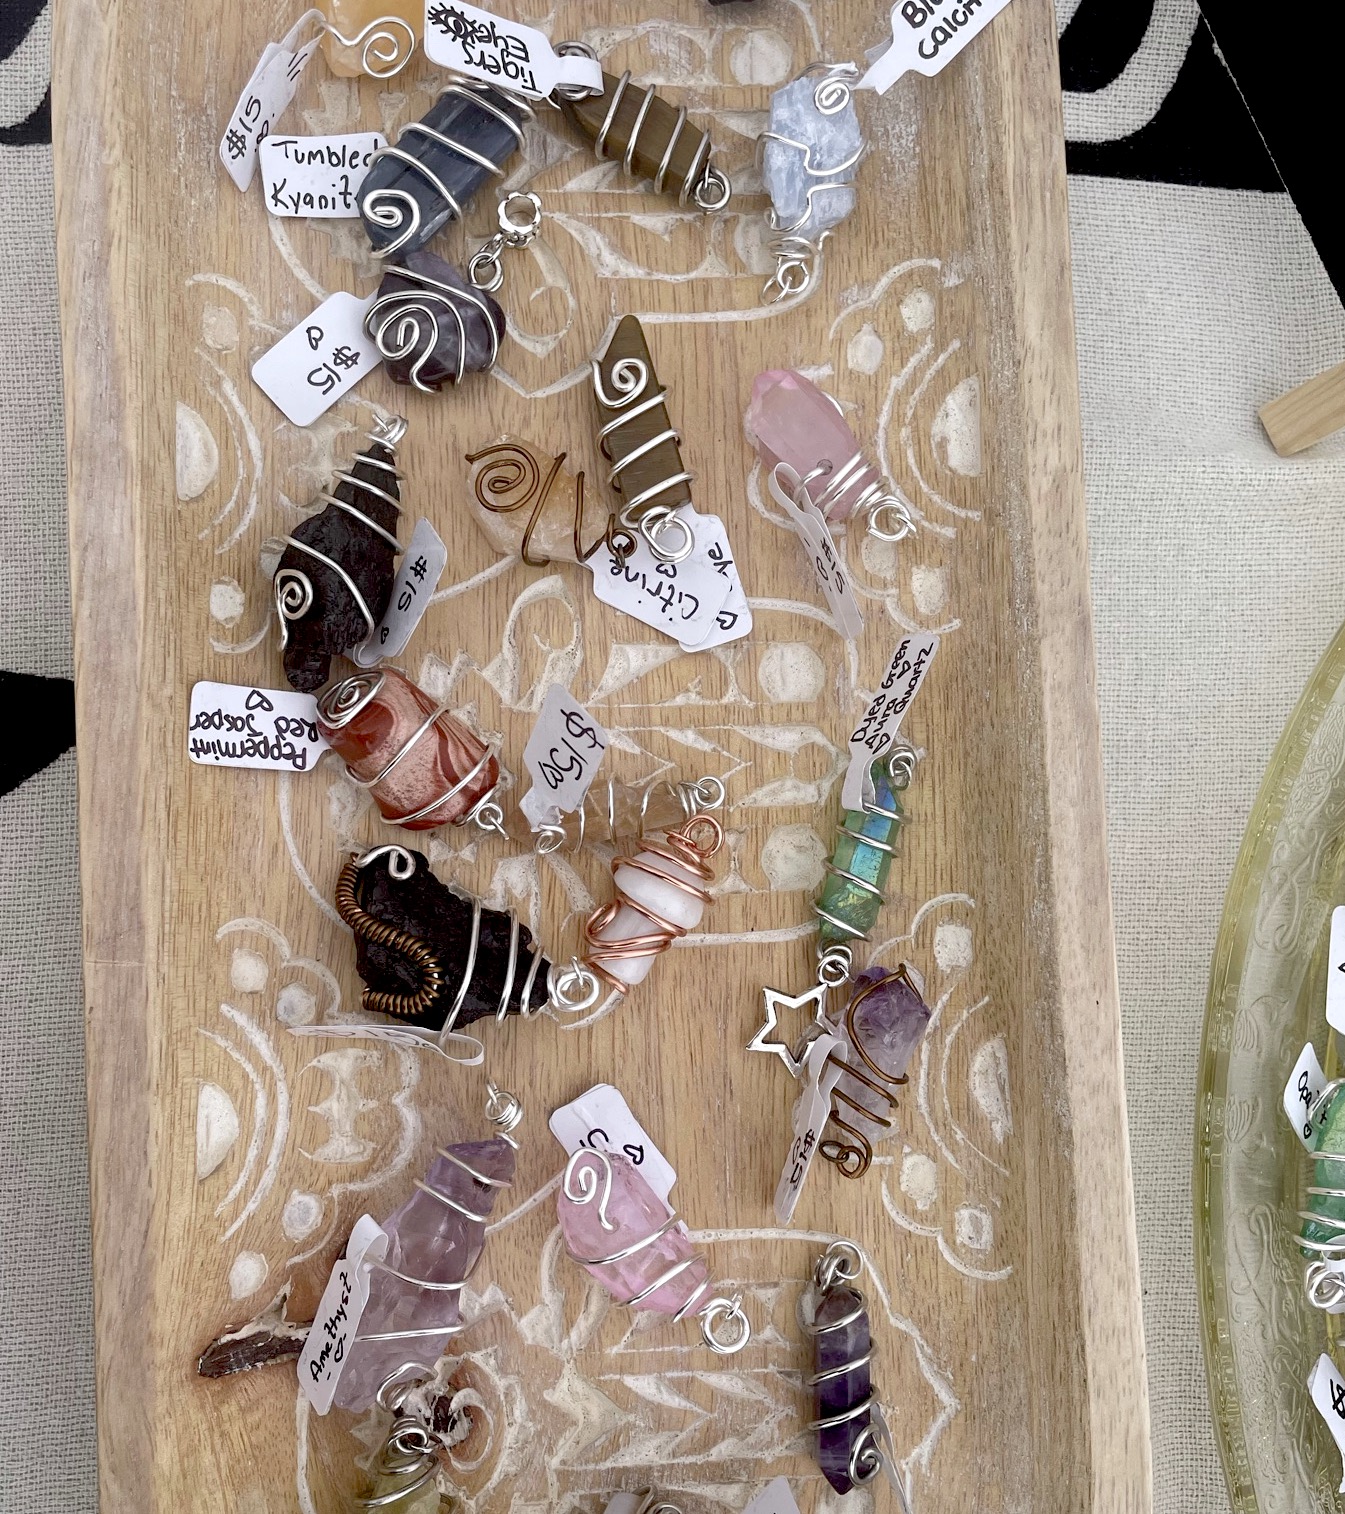 Bowl of natural gemstones, wire-wrapped, and priced. Made by Sophie's Crystals.